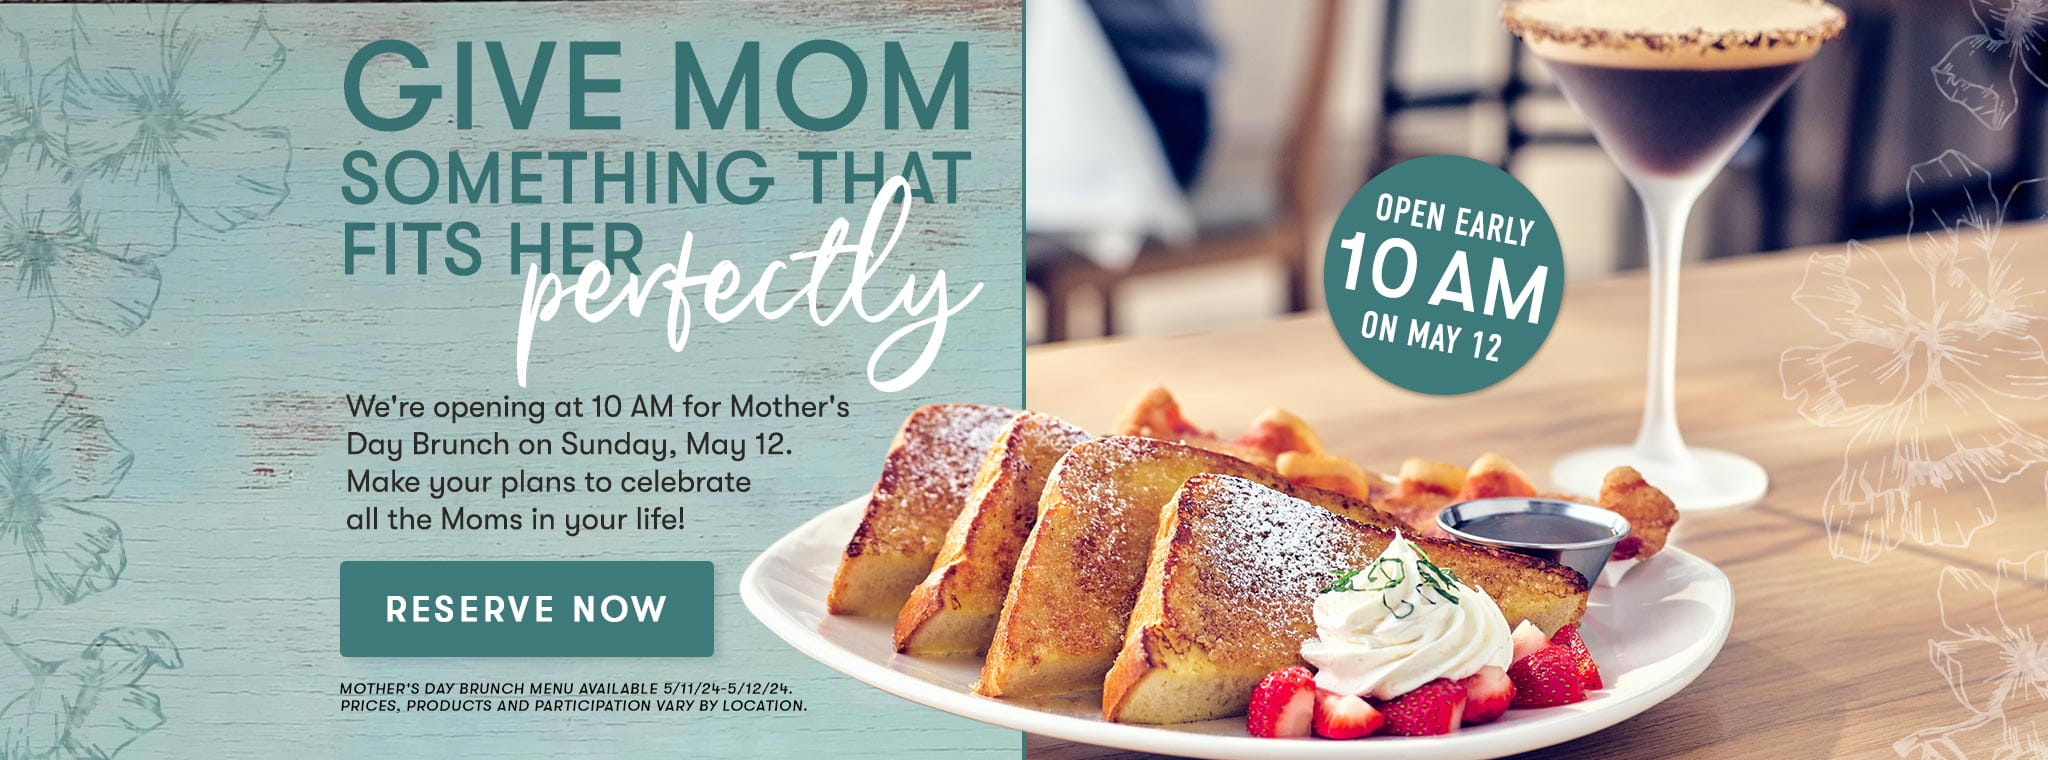 Give mom something that fits her perfectly